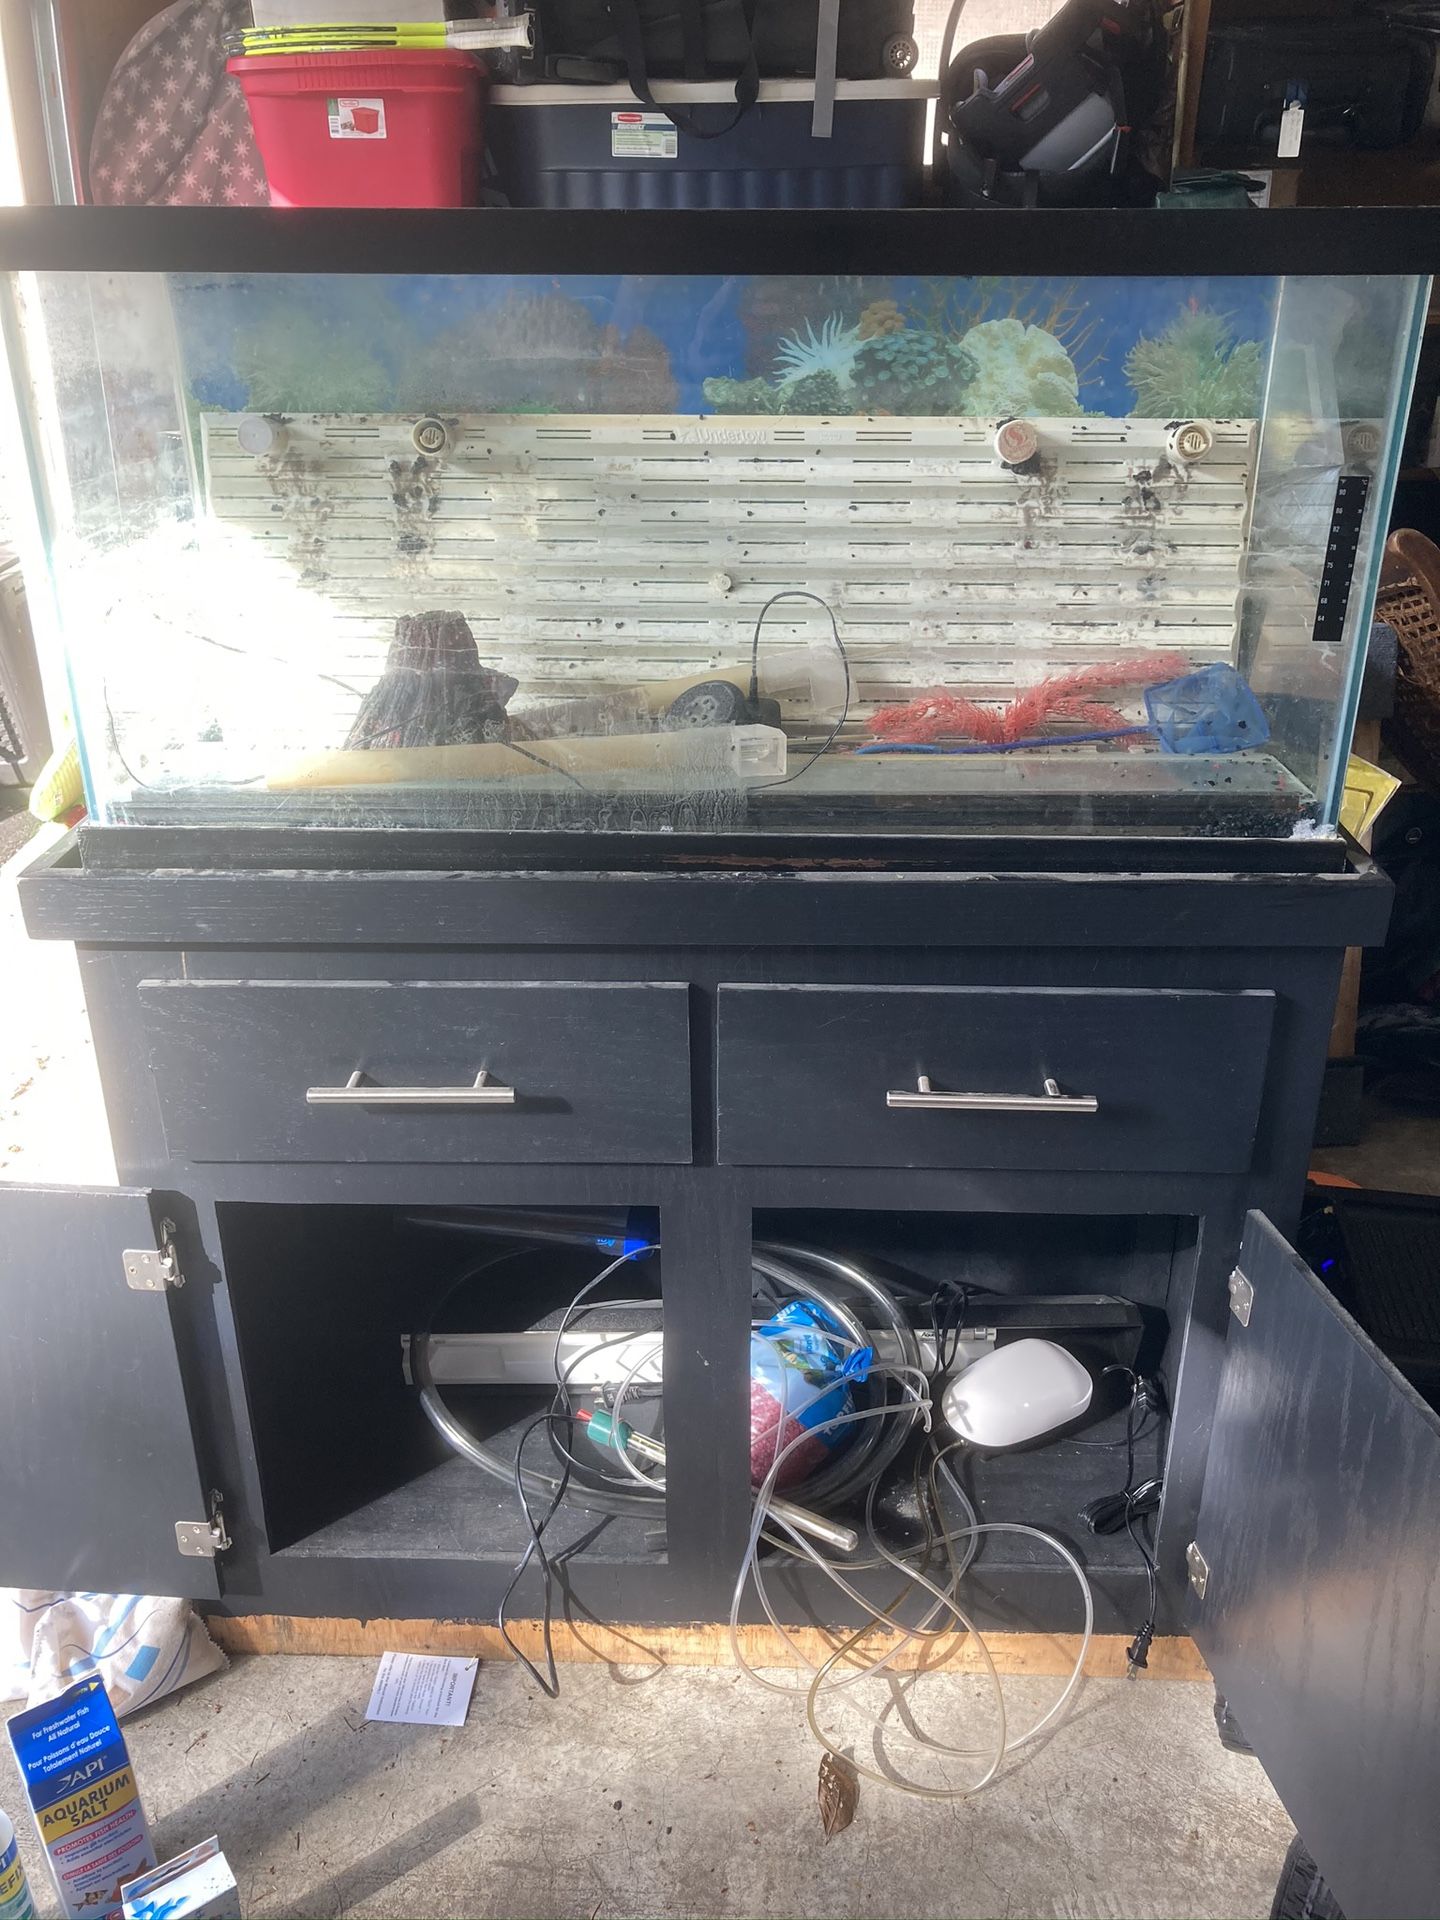 Free fish tank with supplies. 15dx17hx36w *PENDING*